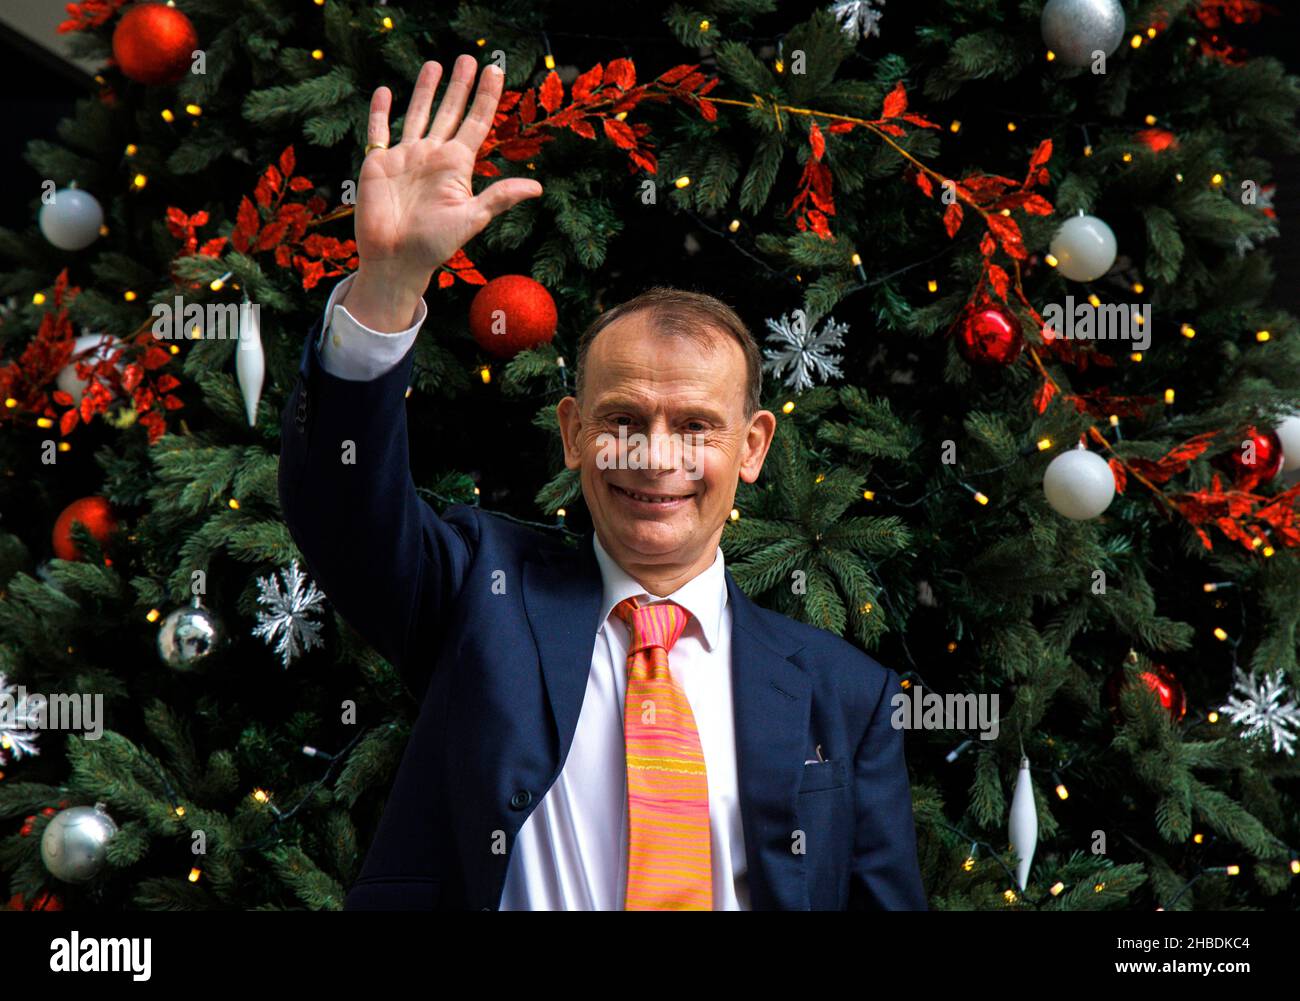 London, UK. 19th Dec, 2021. Andrew Marr waves goodbye as he leaves the BBC Studios after presenting his final show. He is joining Global radio and writing and presenting for other companies in the New Year. He is leaving the BBC after 21 years including 16 years presenting his Sunday morning show. Credit: Tommy London/Alamy Live News Stock Photo